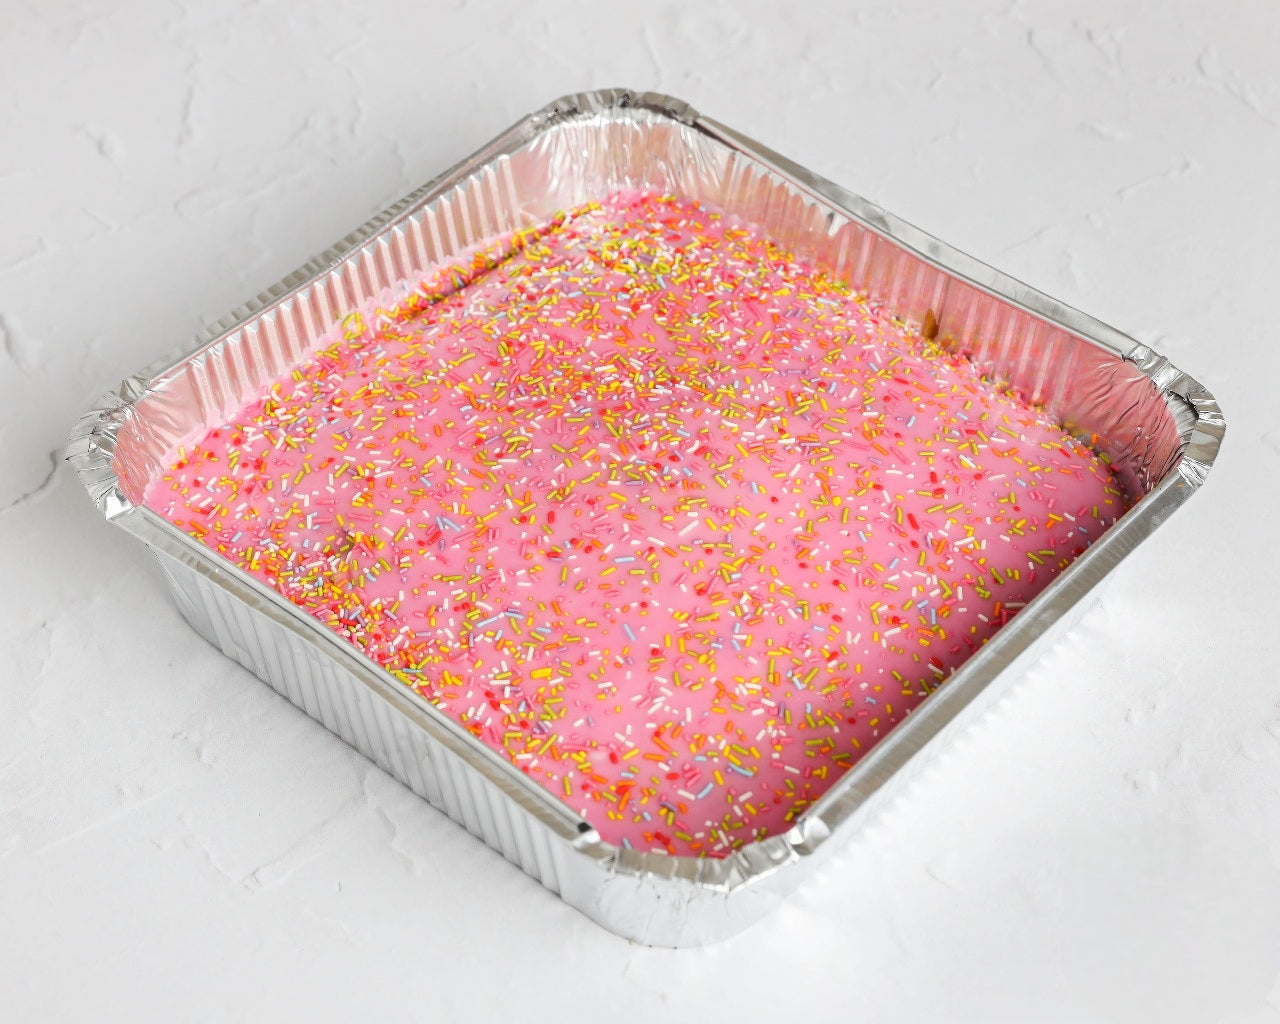 Pink School Cake Tray Delivery Sprinkles